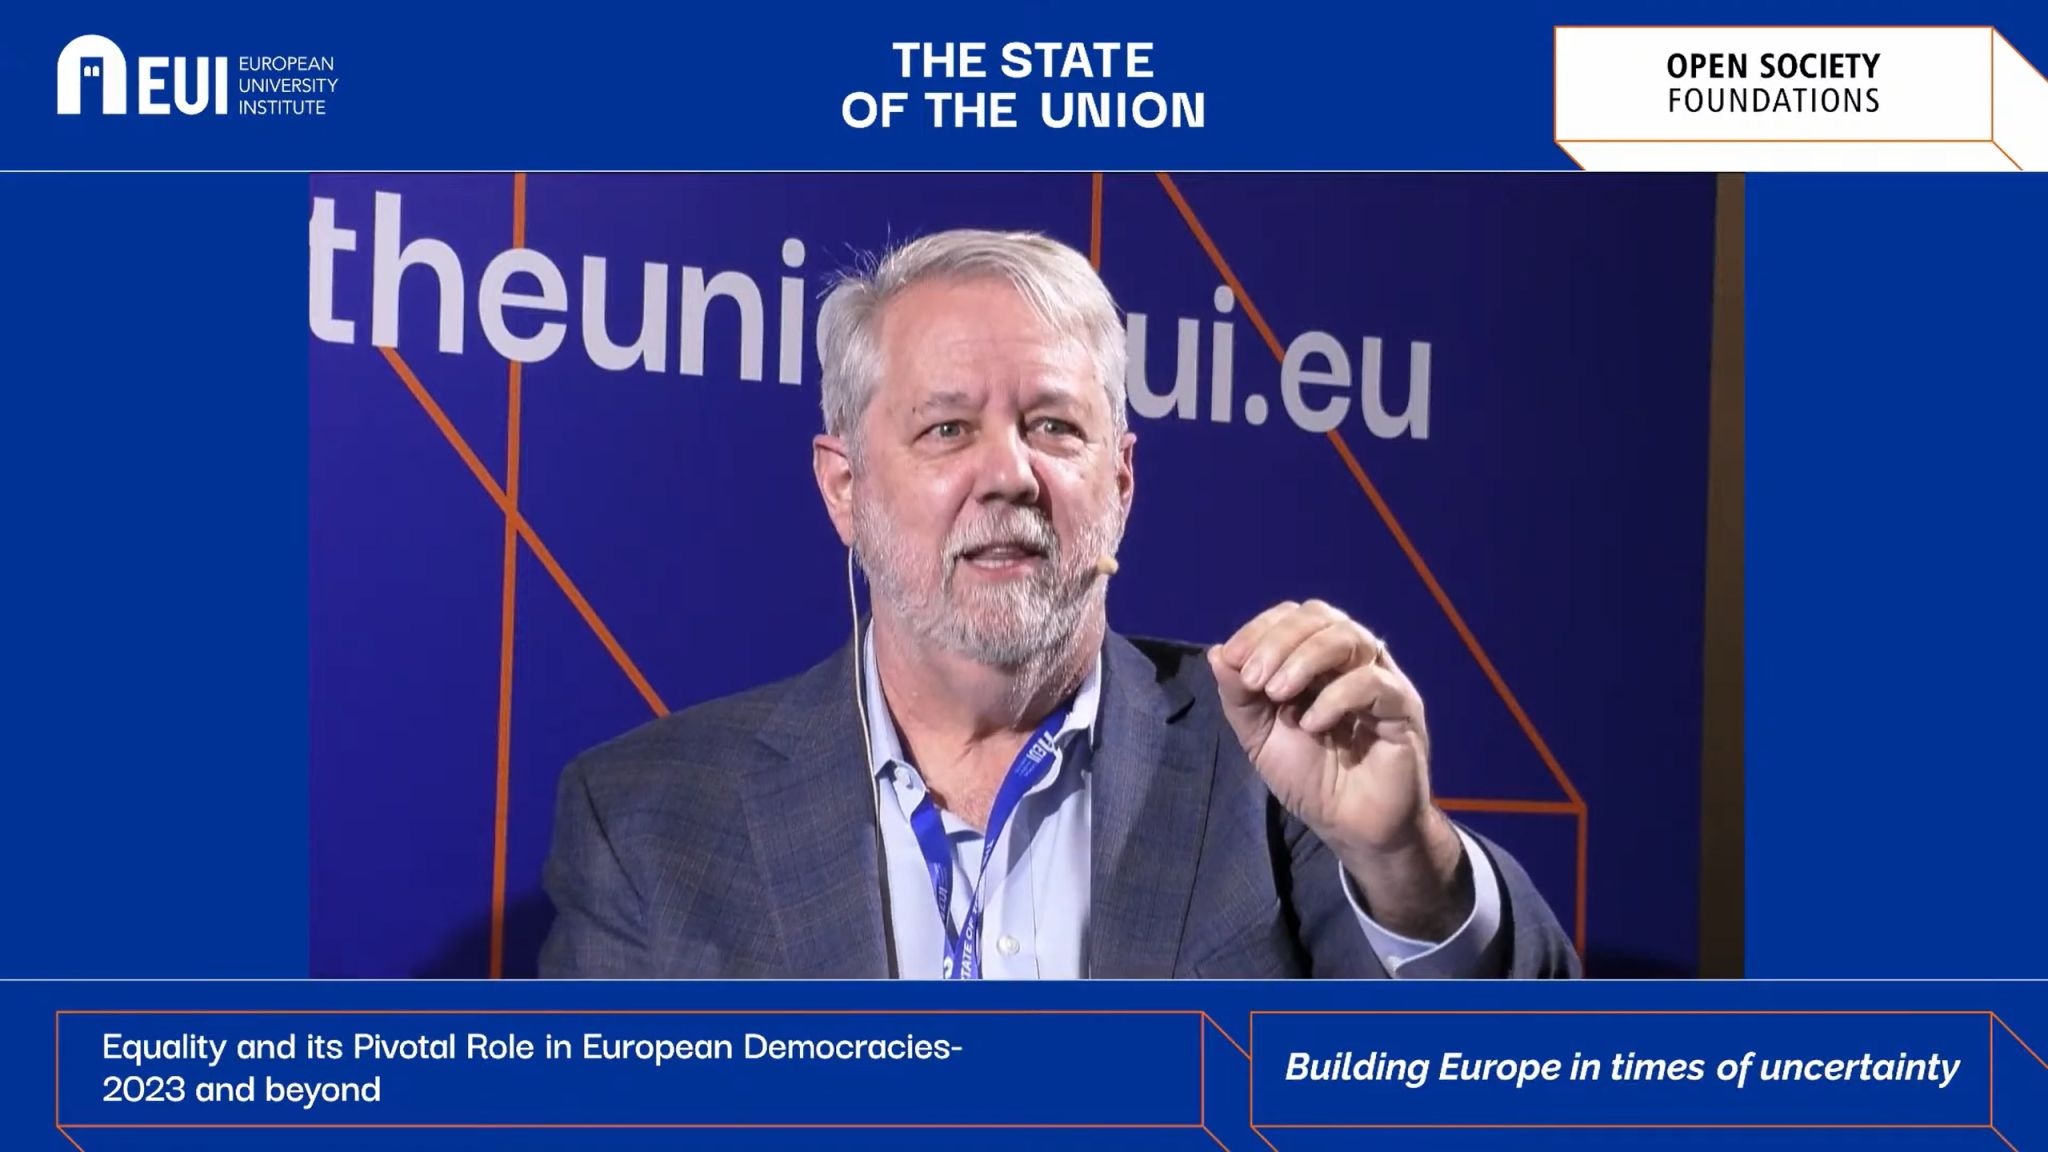 Listen to Matt MacWilliams, our Global Public Opinion Strategist, speaking at the European University Institute’s the State of the Union event